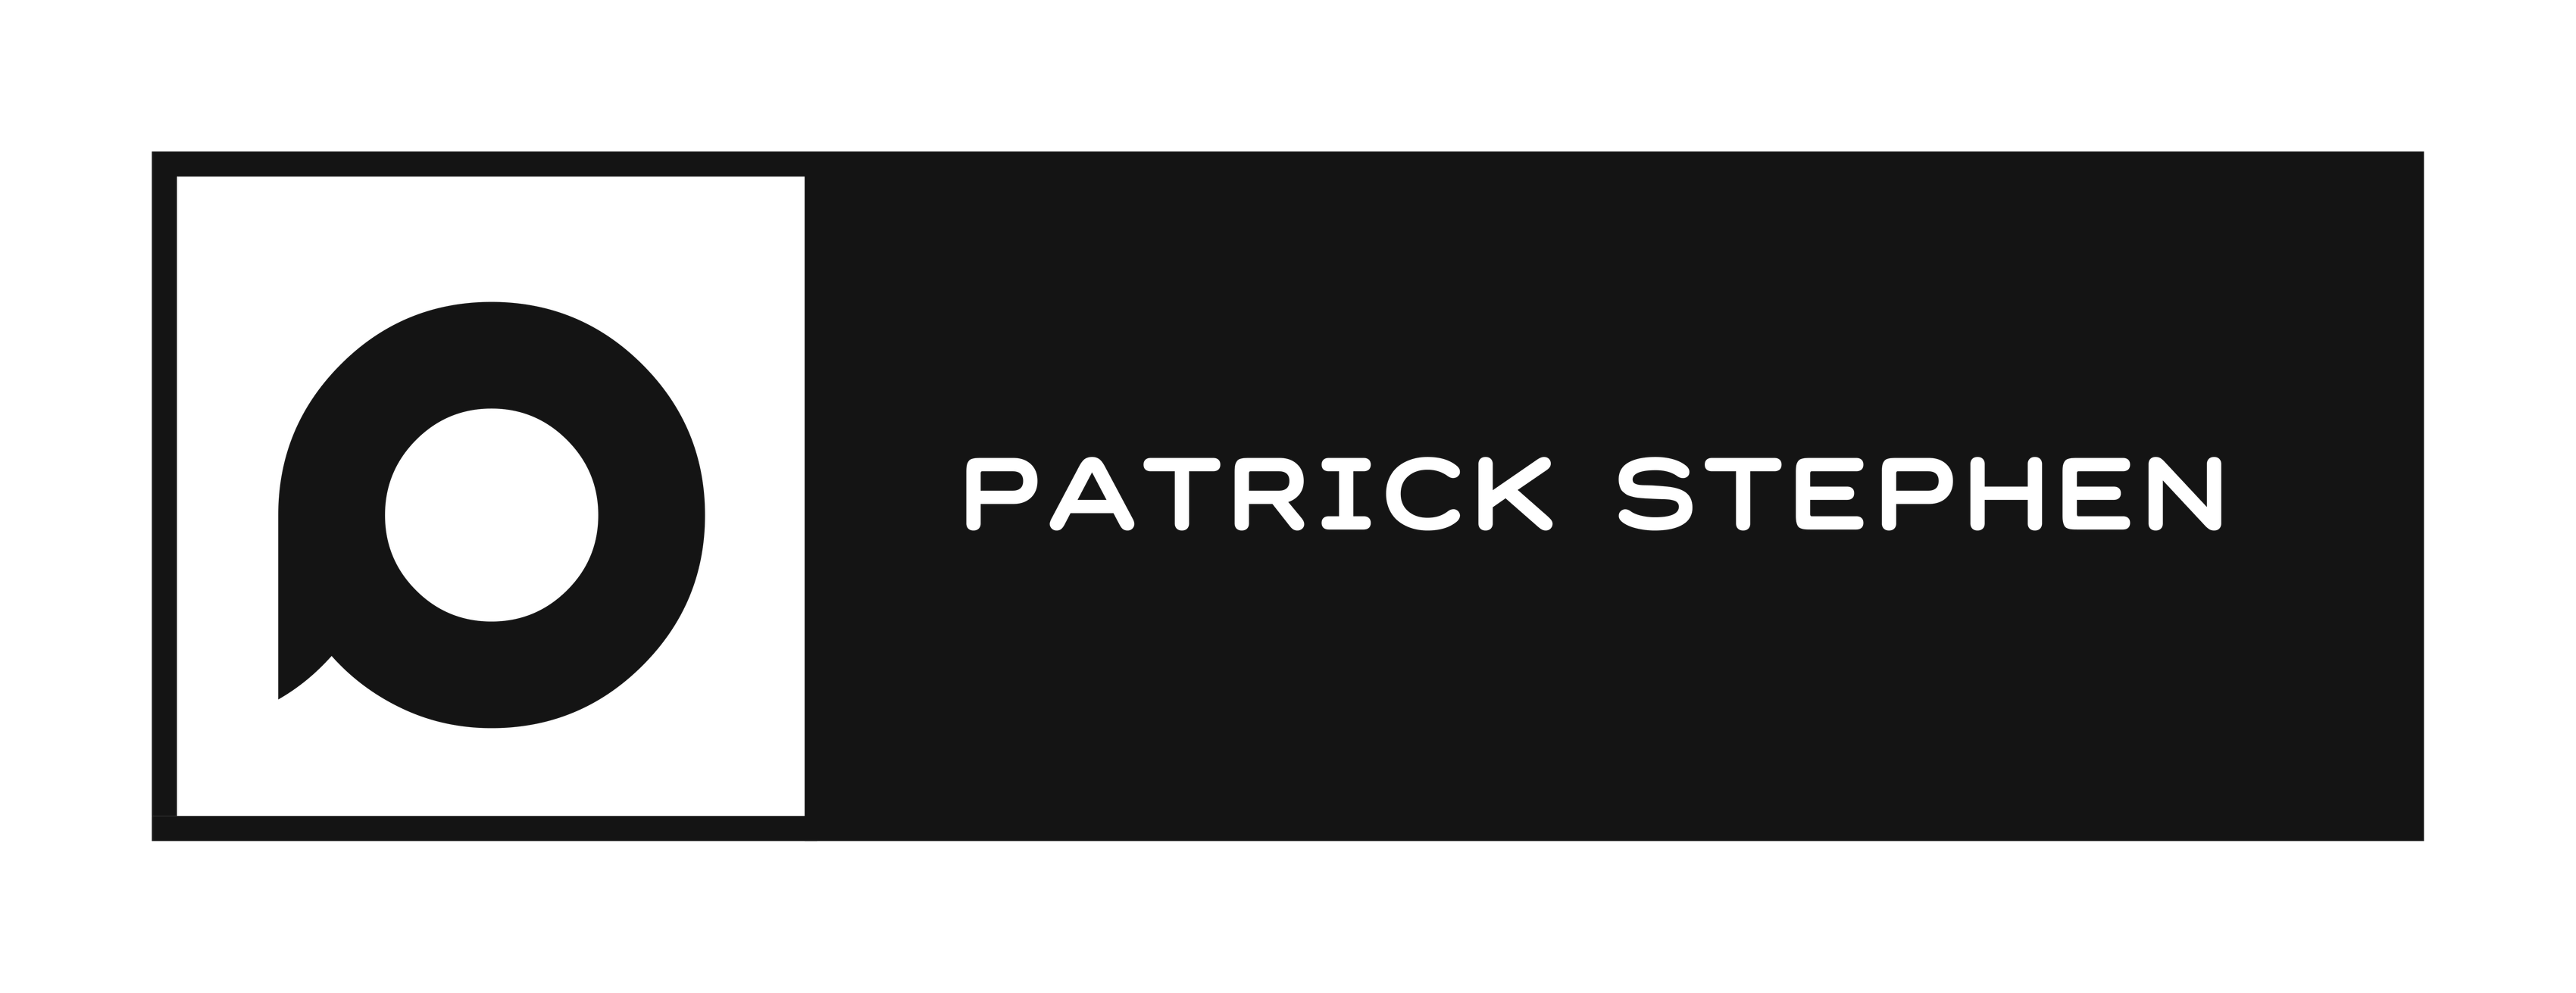 a black and white logo for patrick stephen